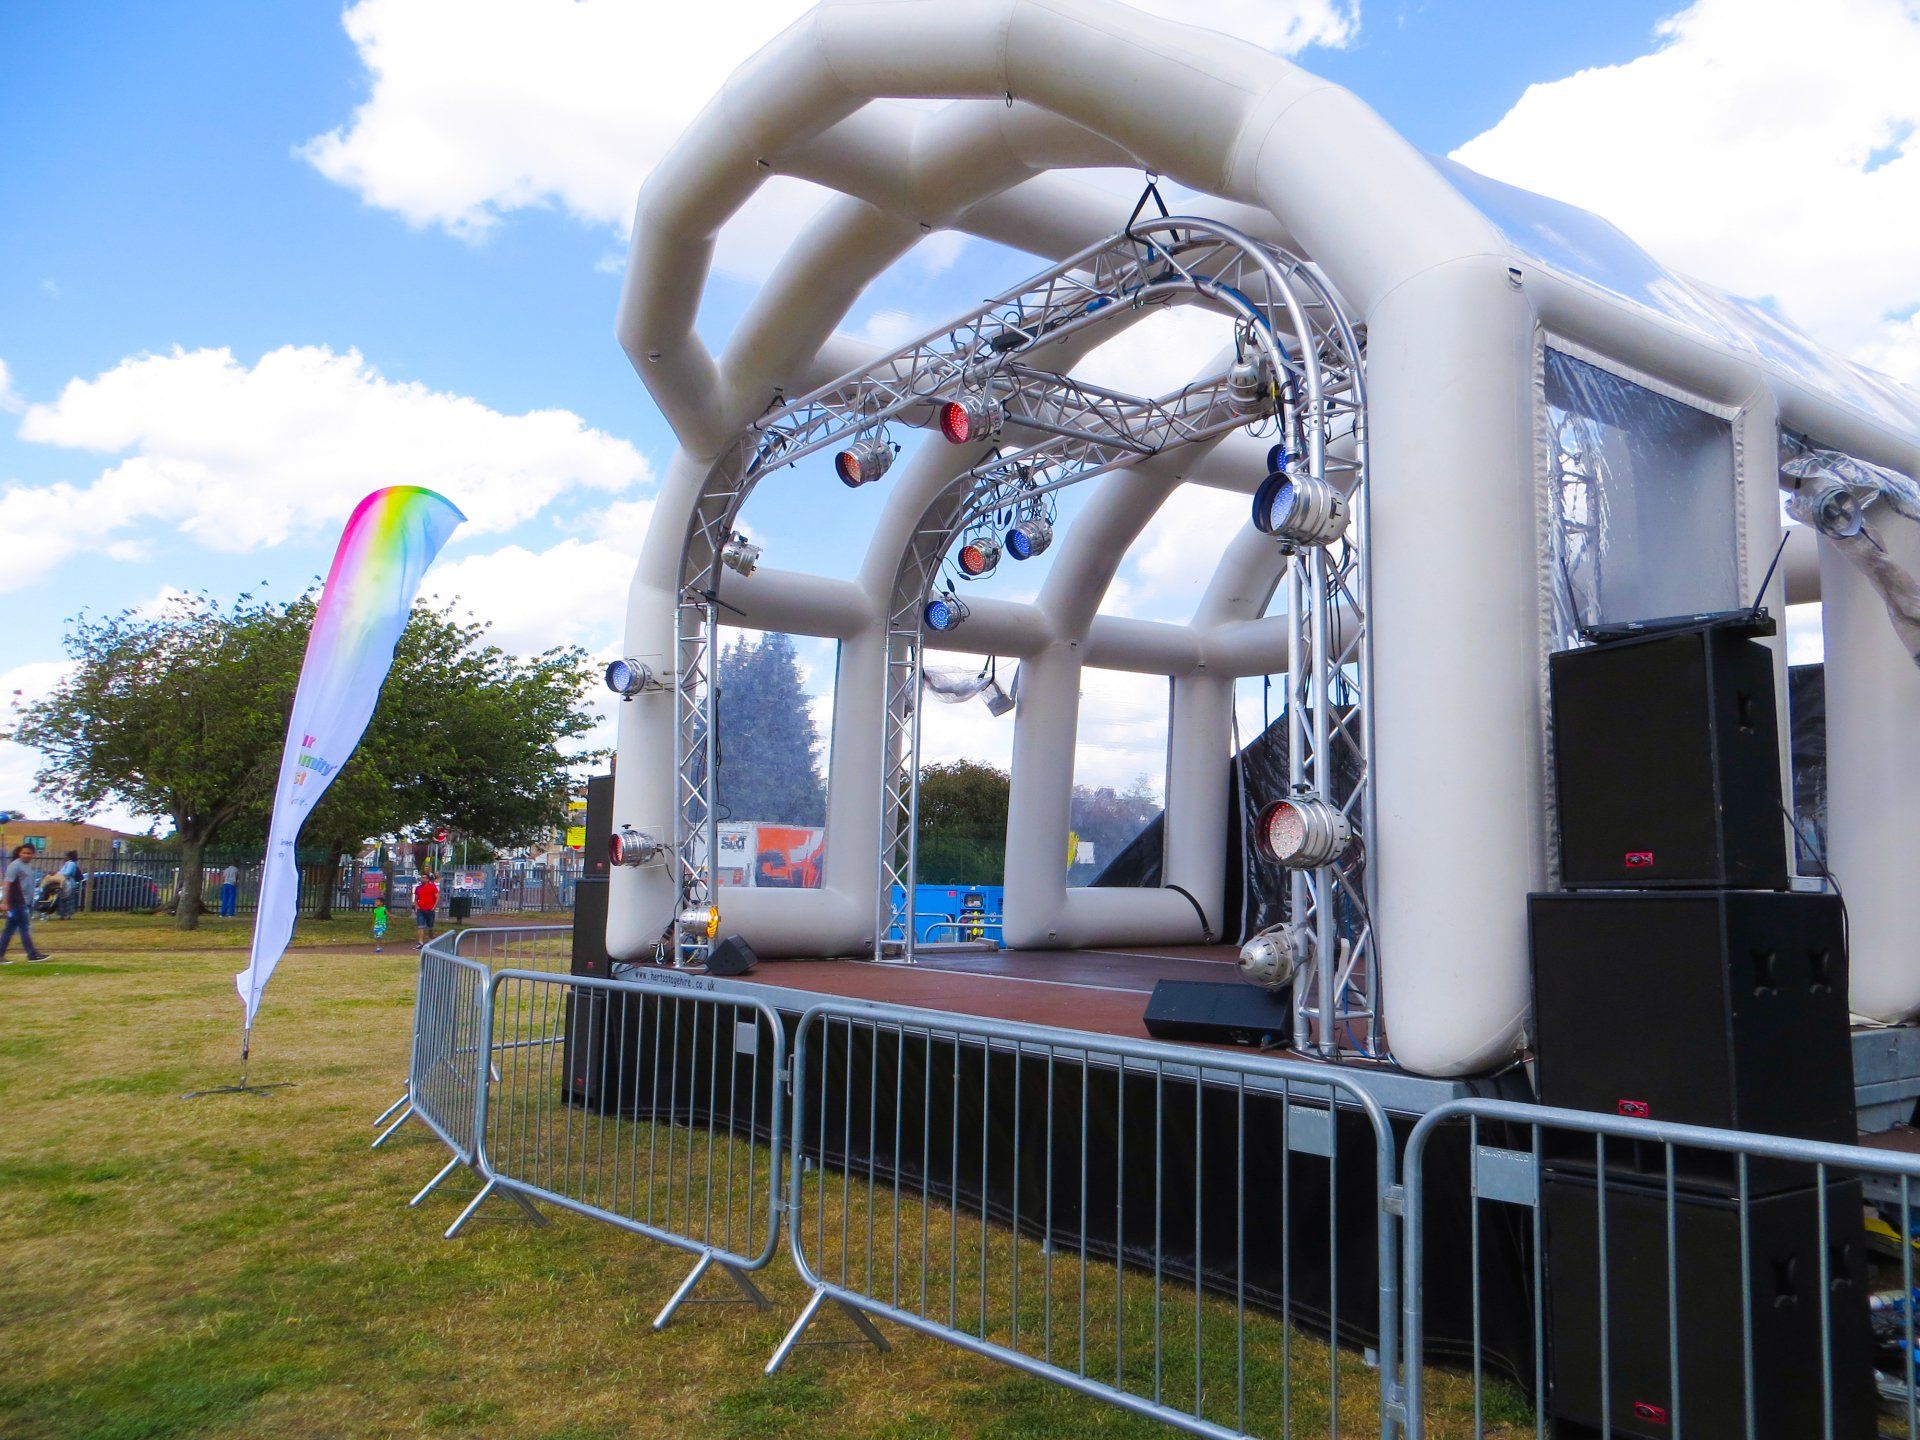 Inflatable roof modular stage set up for an outdoor event